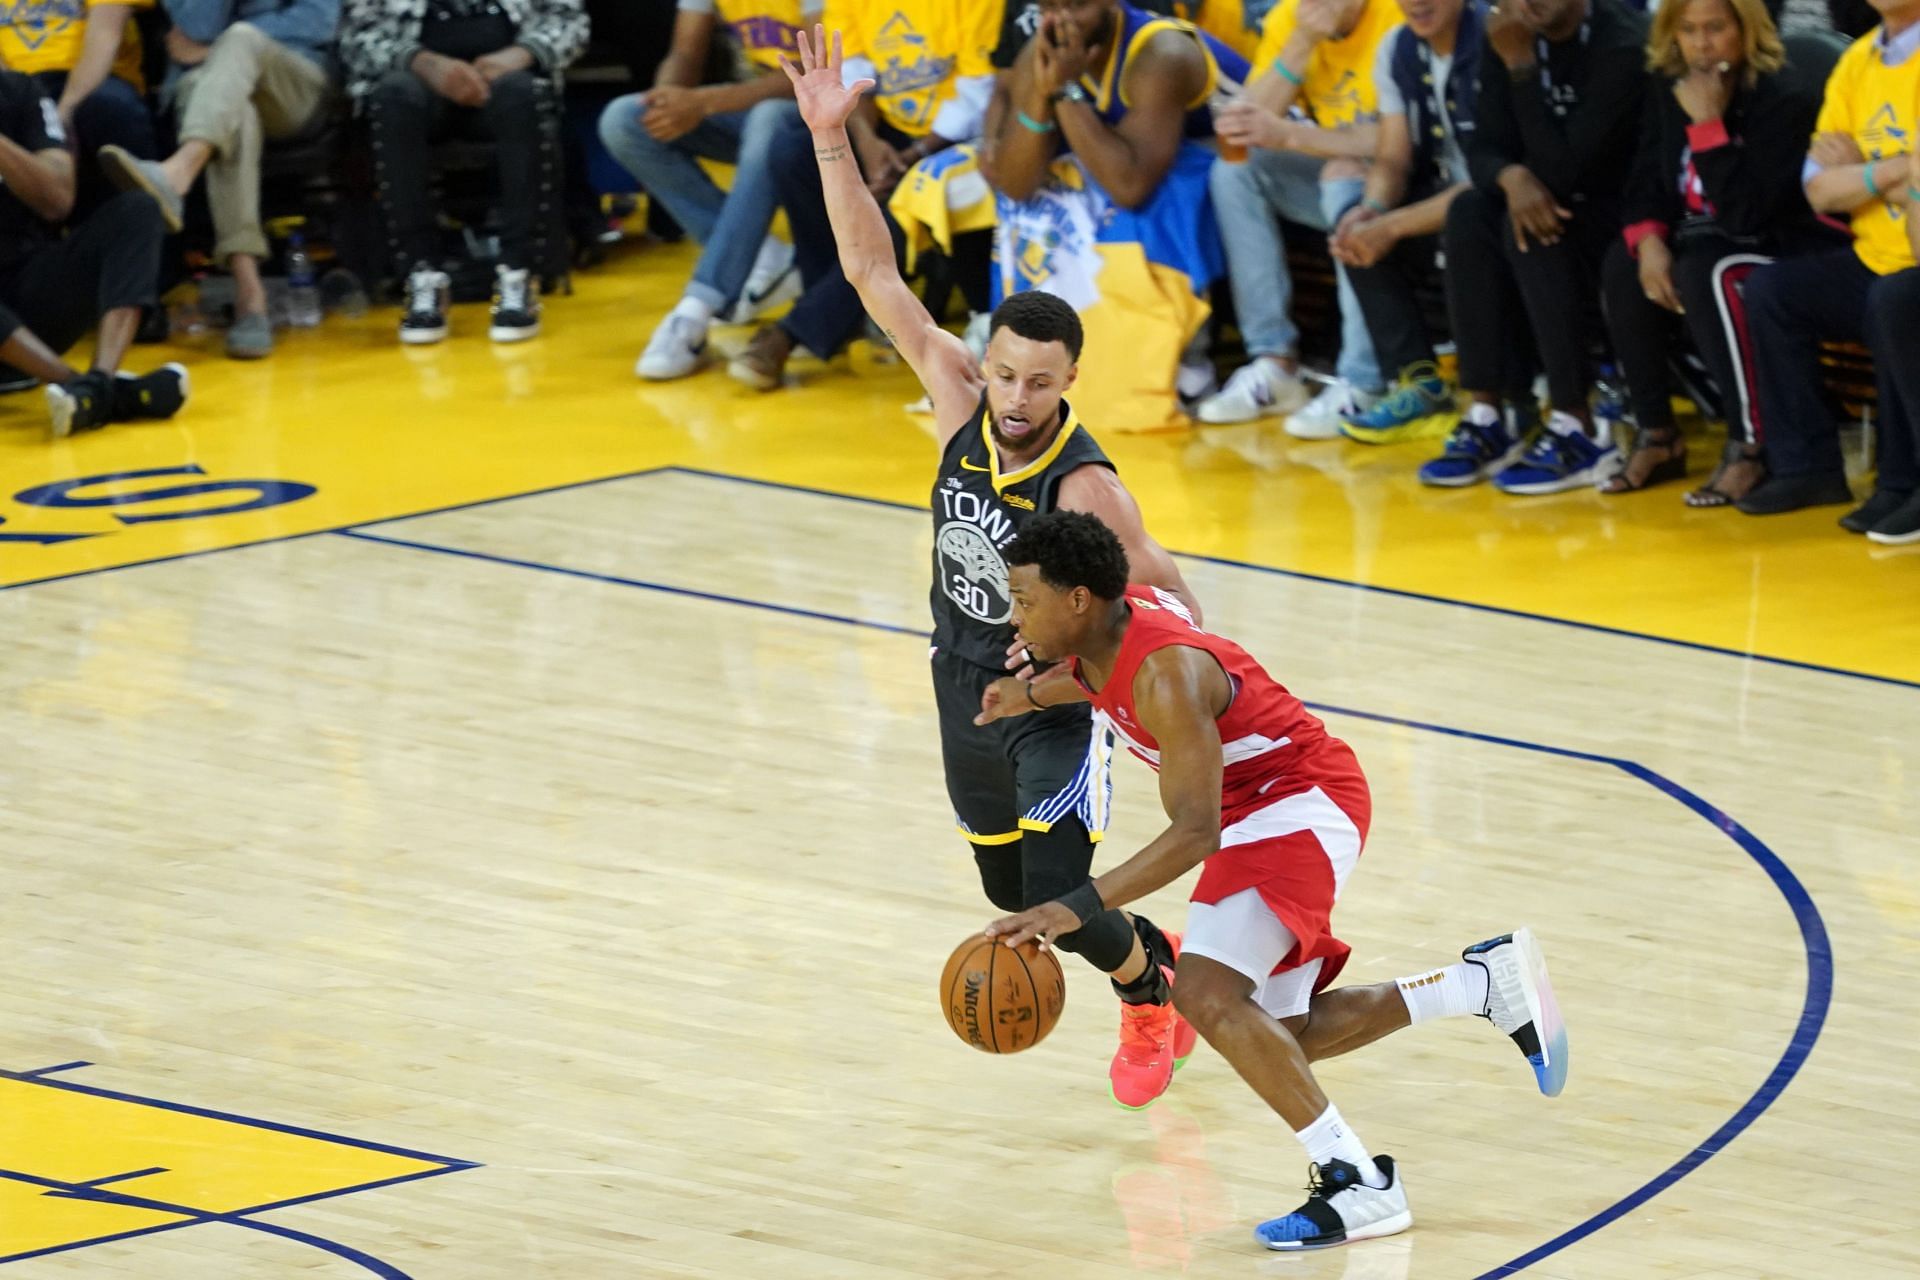 Kyle Lowry #7 of the Toronto Raptors is defended by Stephen Curry #30 of the Golden State Warriors during Game Six of the 2019 NBA Finals at ORACLE Arena on June 13, 2019 in Oakland, California.